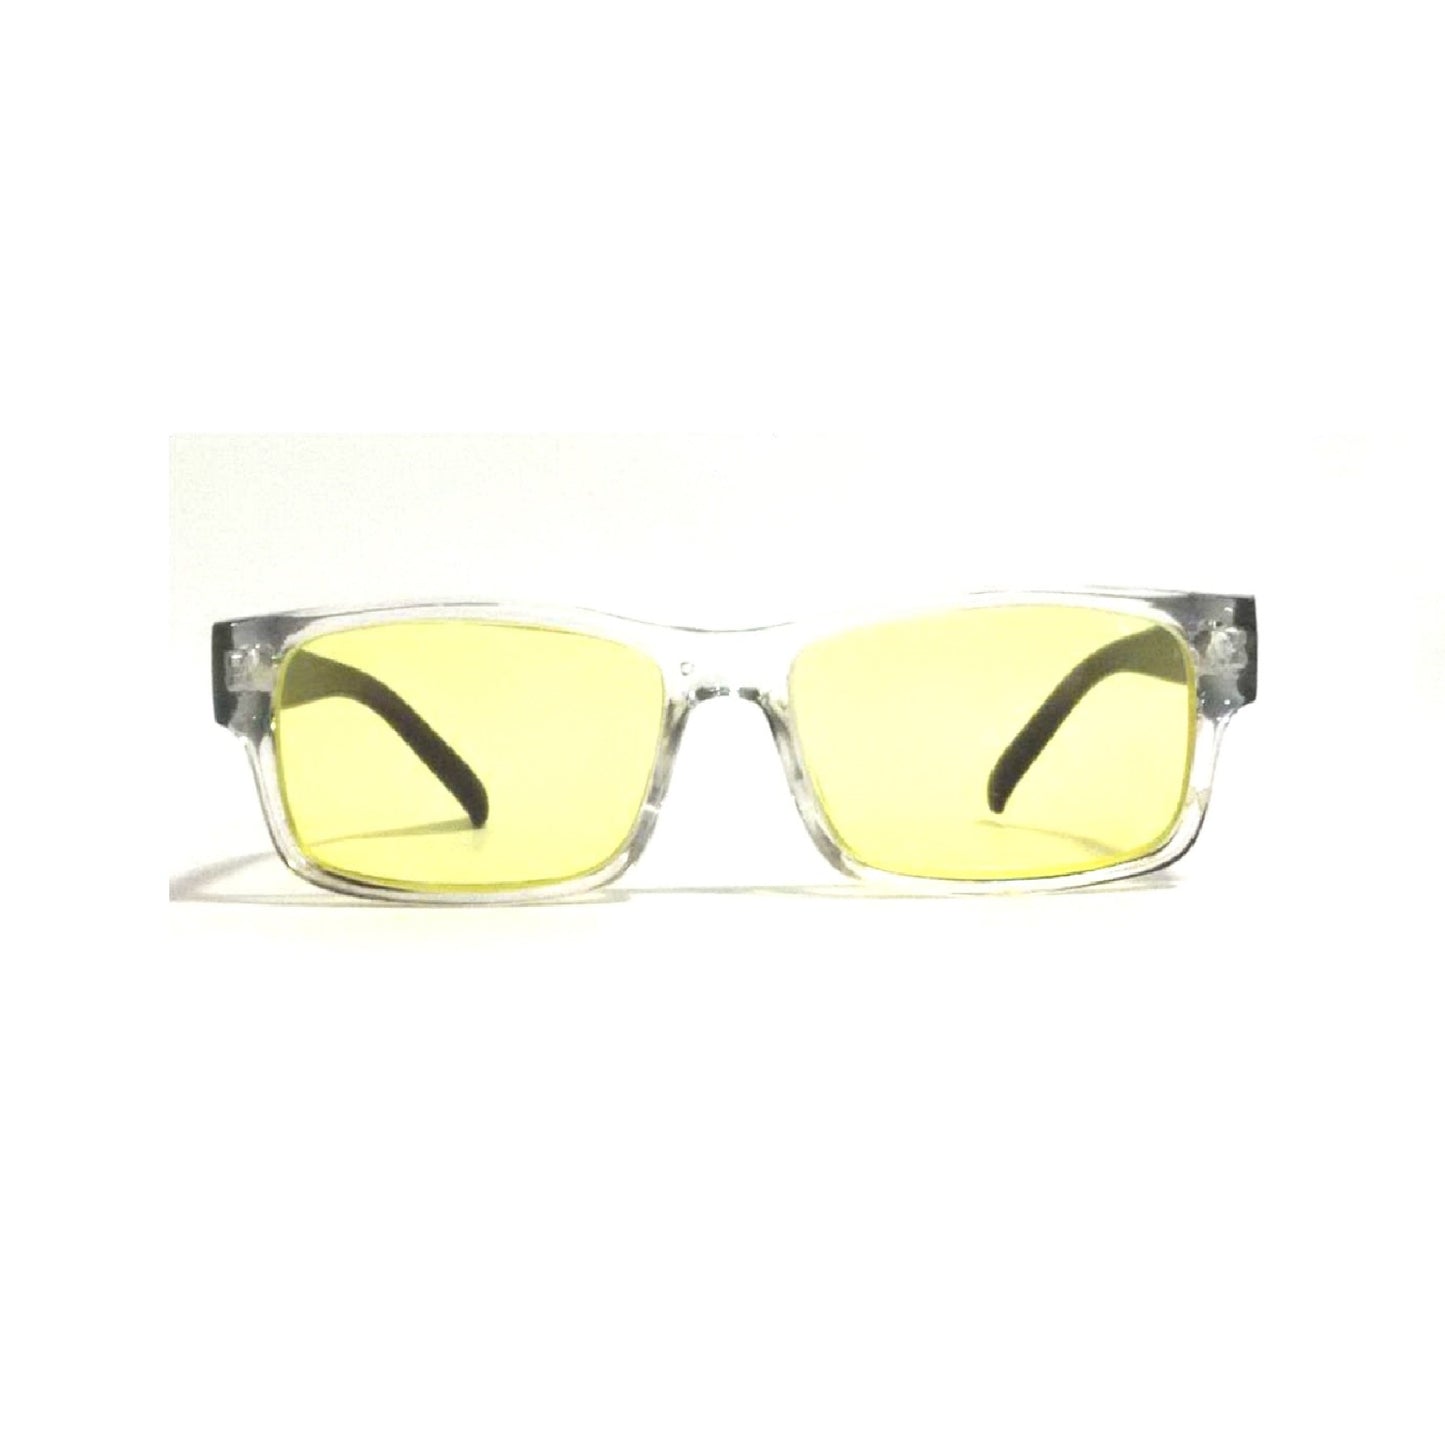 Latest Fashion Rectangle Night Driving Glasses for Men and Women with Anti Glare Coating